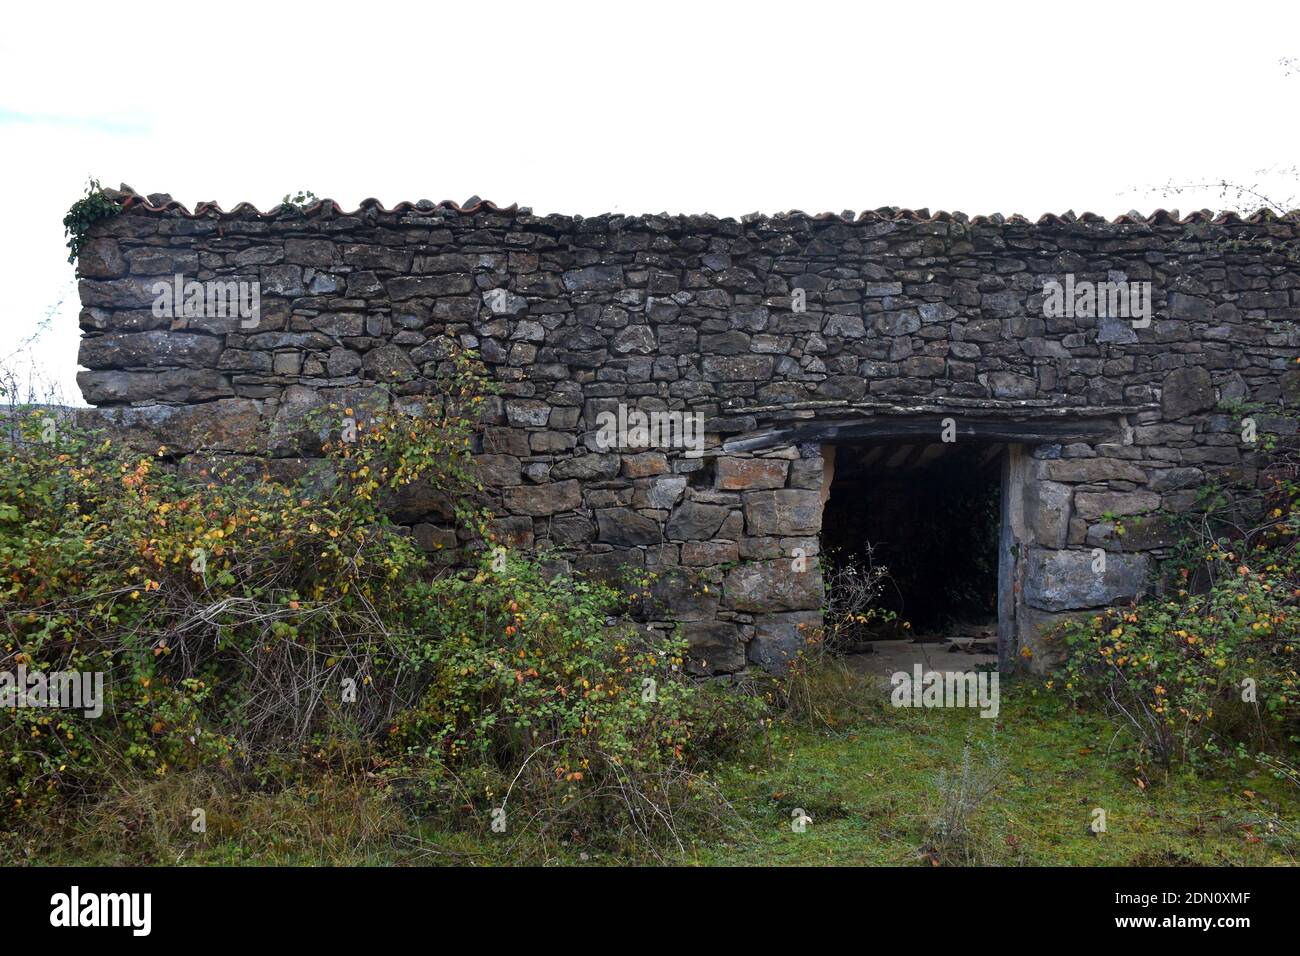 Old dry stone corral, surrounded by undergrowth. Stock Photo